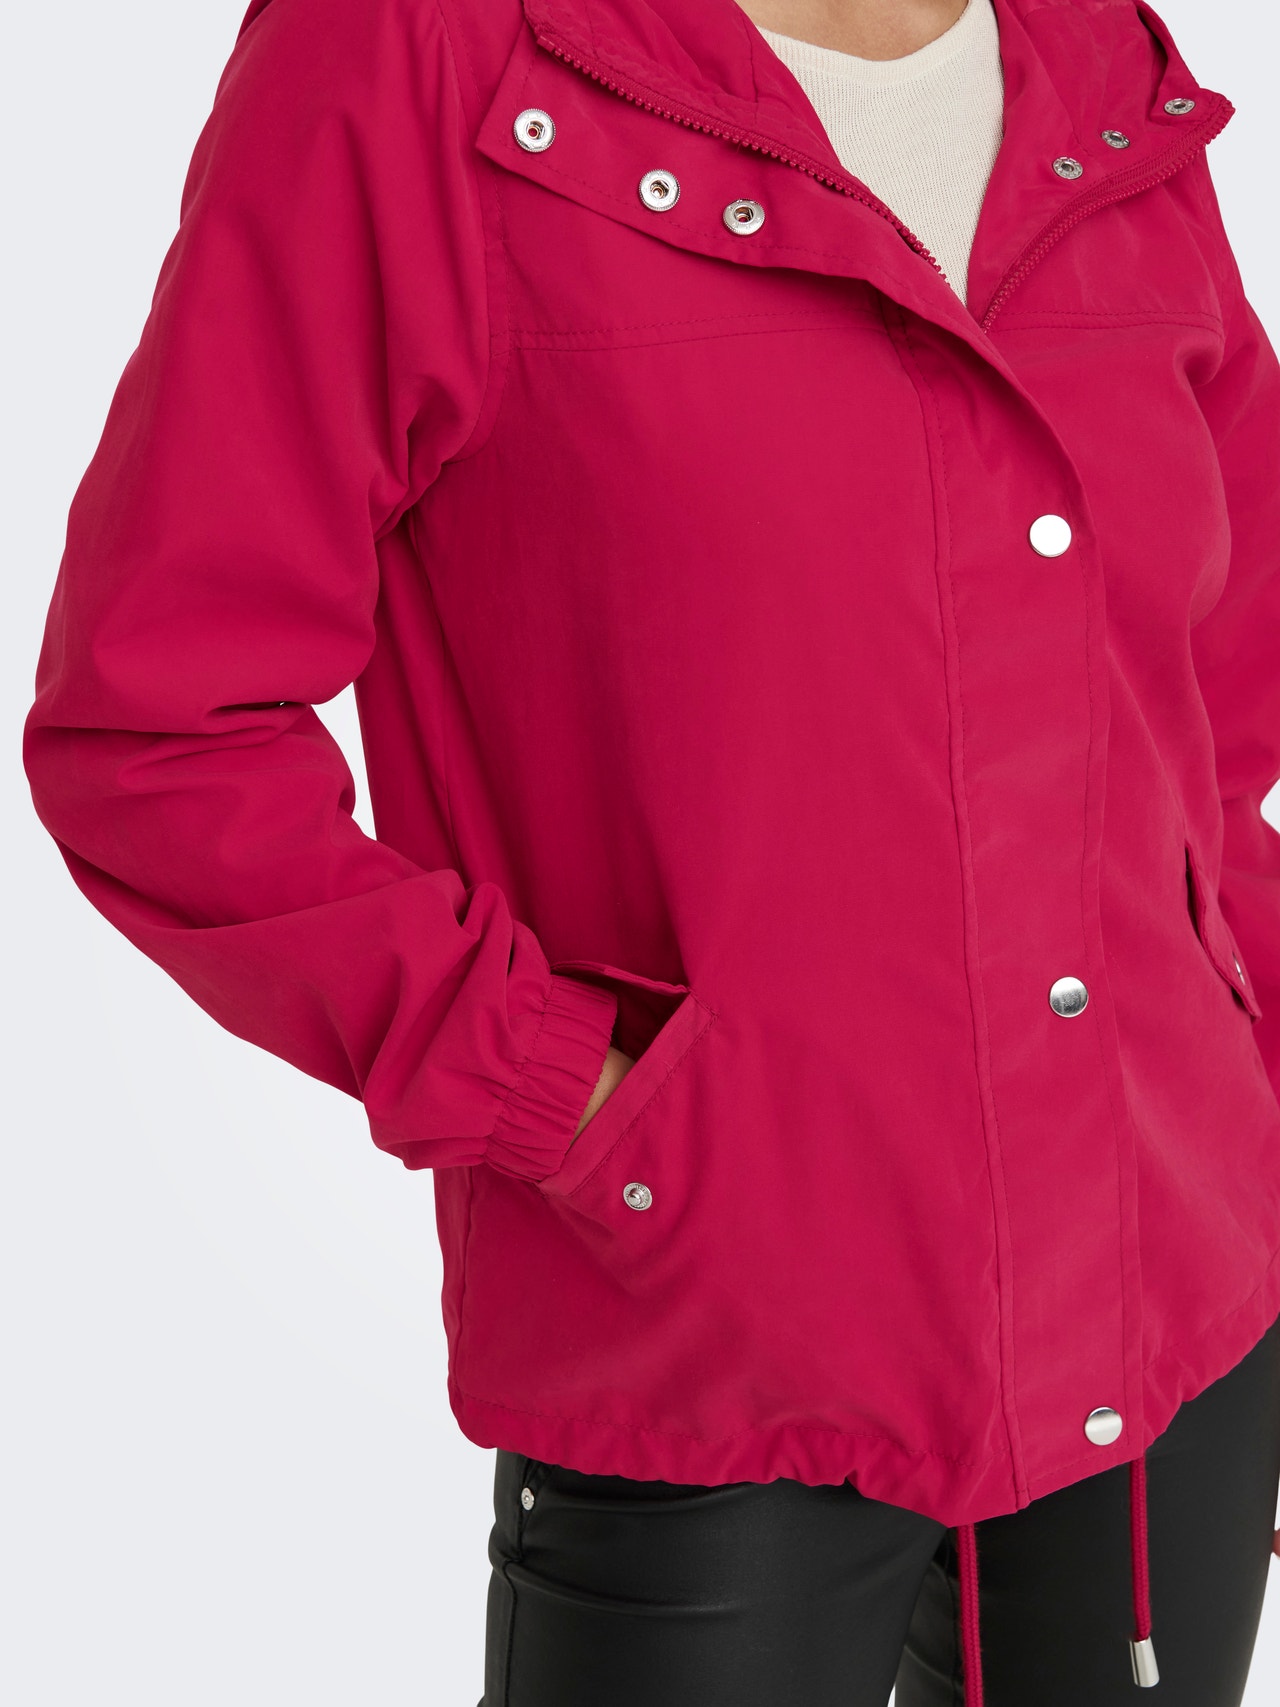 ONLY Hooded Jacket -Persian Red - 15231644